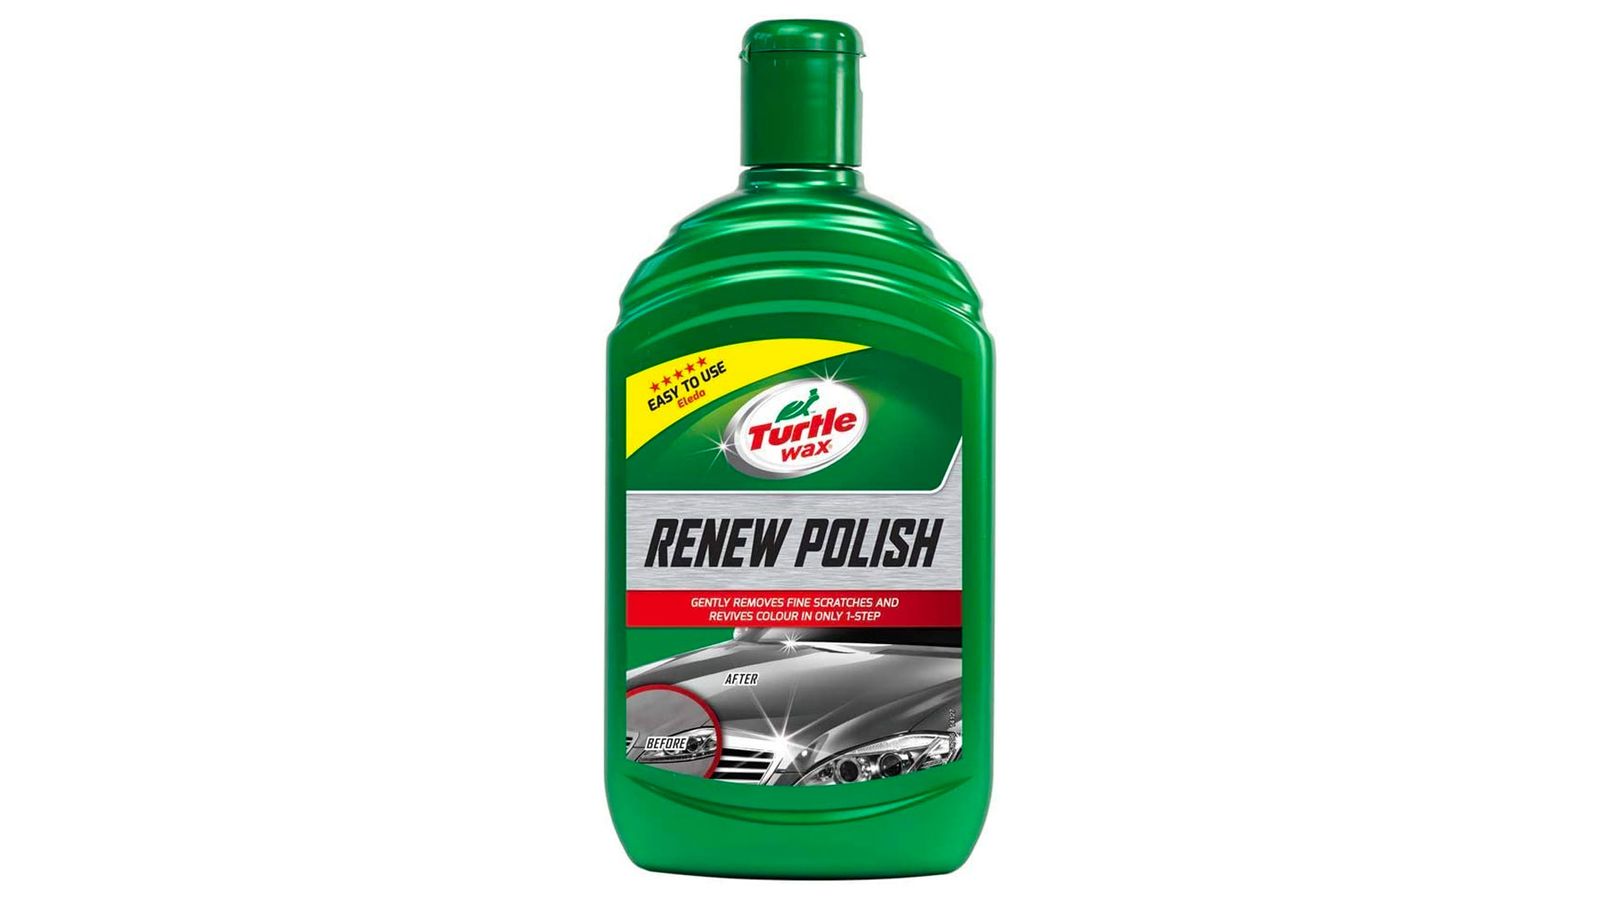 Turtle Wax Renew Polish product image of a green bottle with a red and silver label.